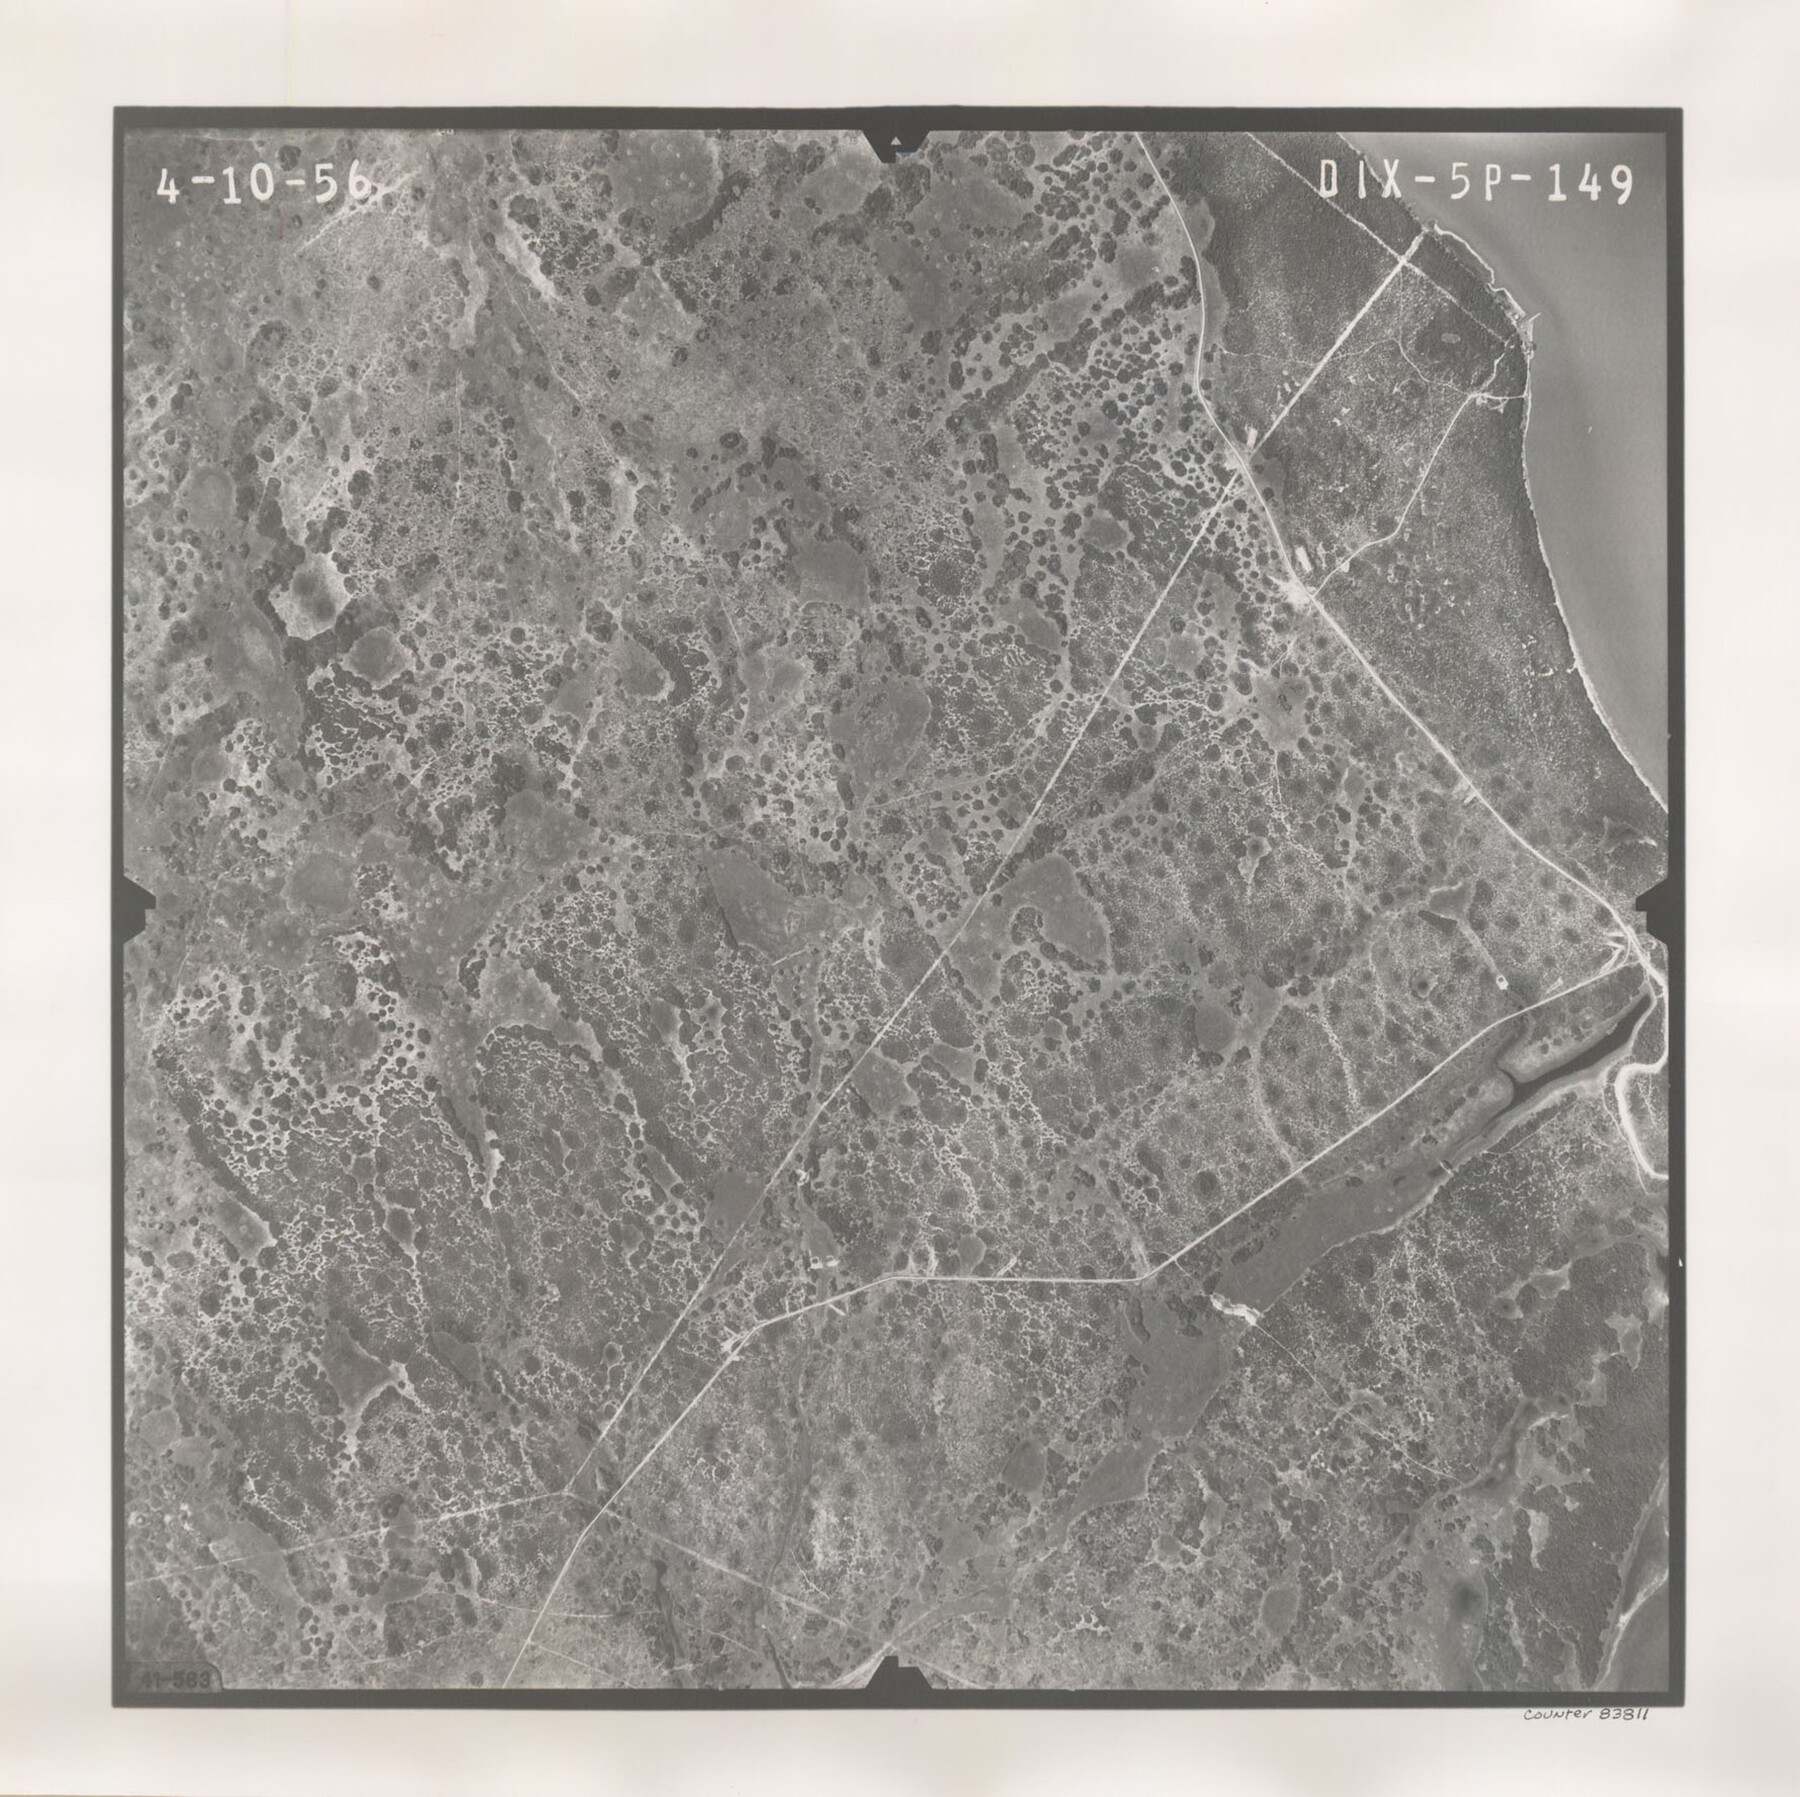 83811, Flight Mission No. DIX-5P, Frame 149, Aransas County, General Map Collection